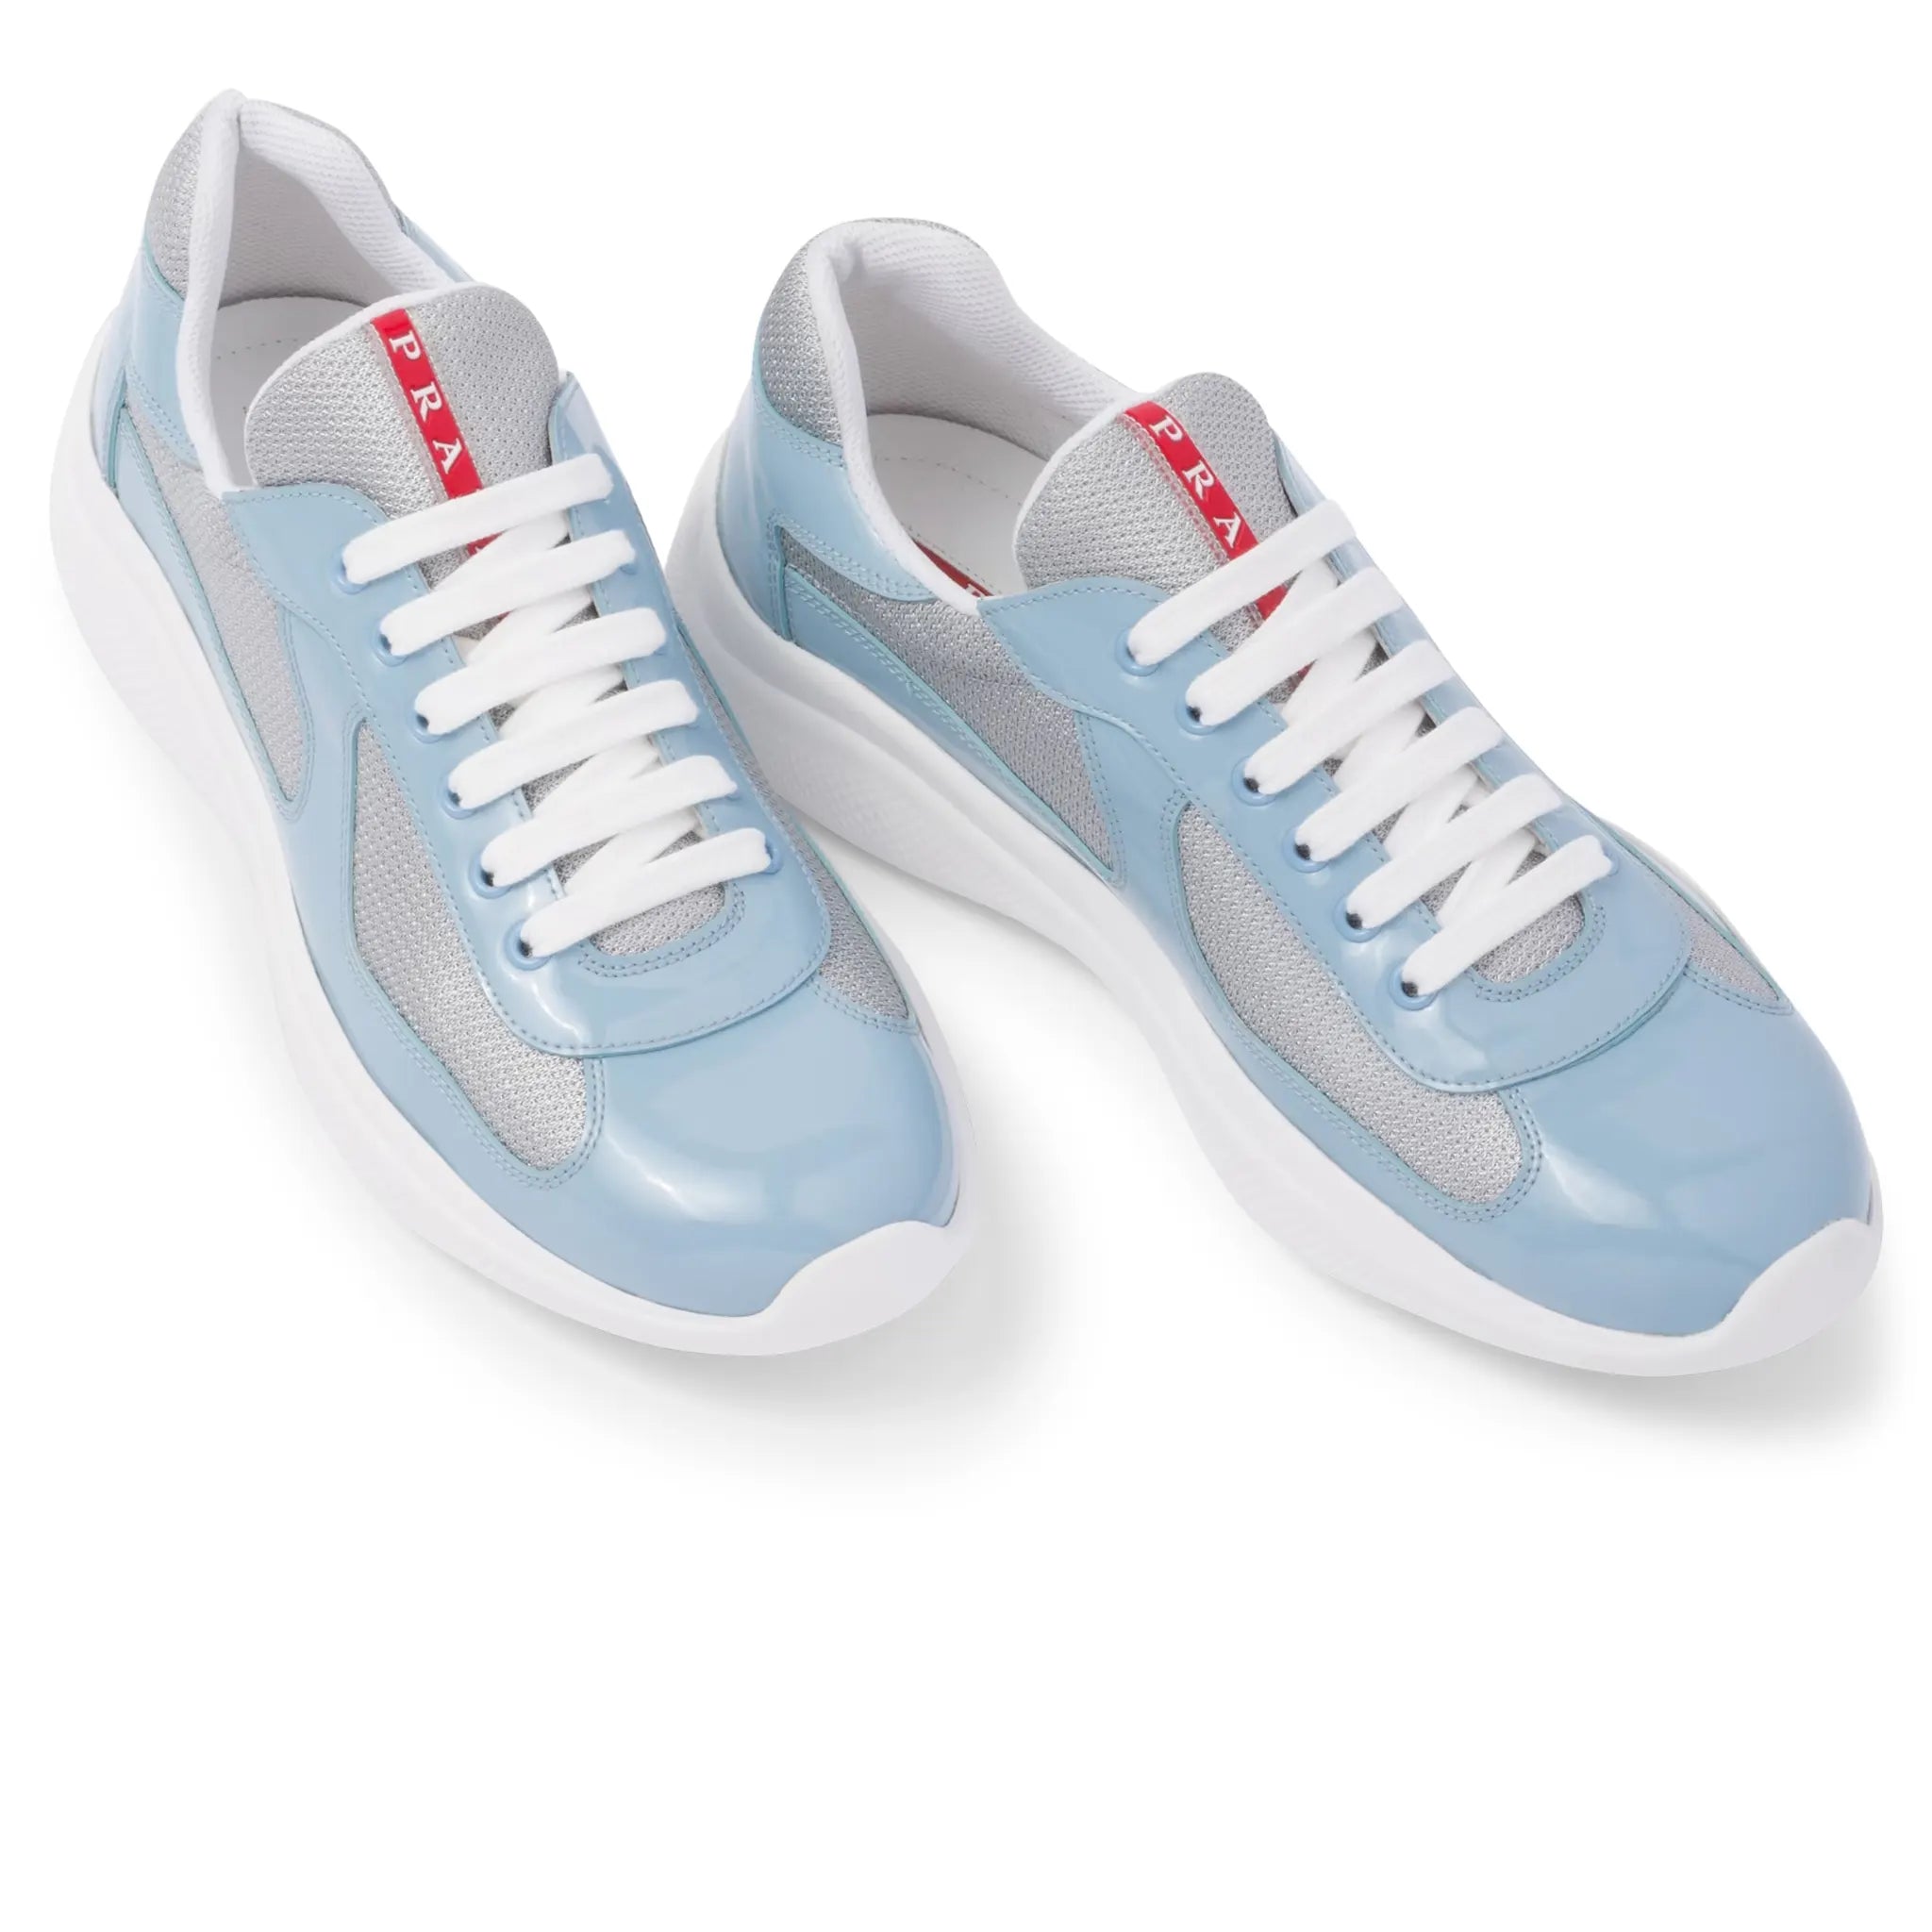 Pair view of Prada Americas Cup Patent Leather and Technical Fabric Silver Celeste Sneakers 4E3400_ASZ_F0D9Z